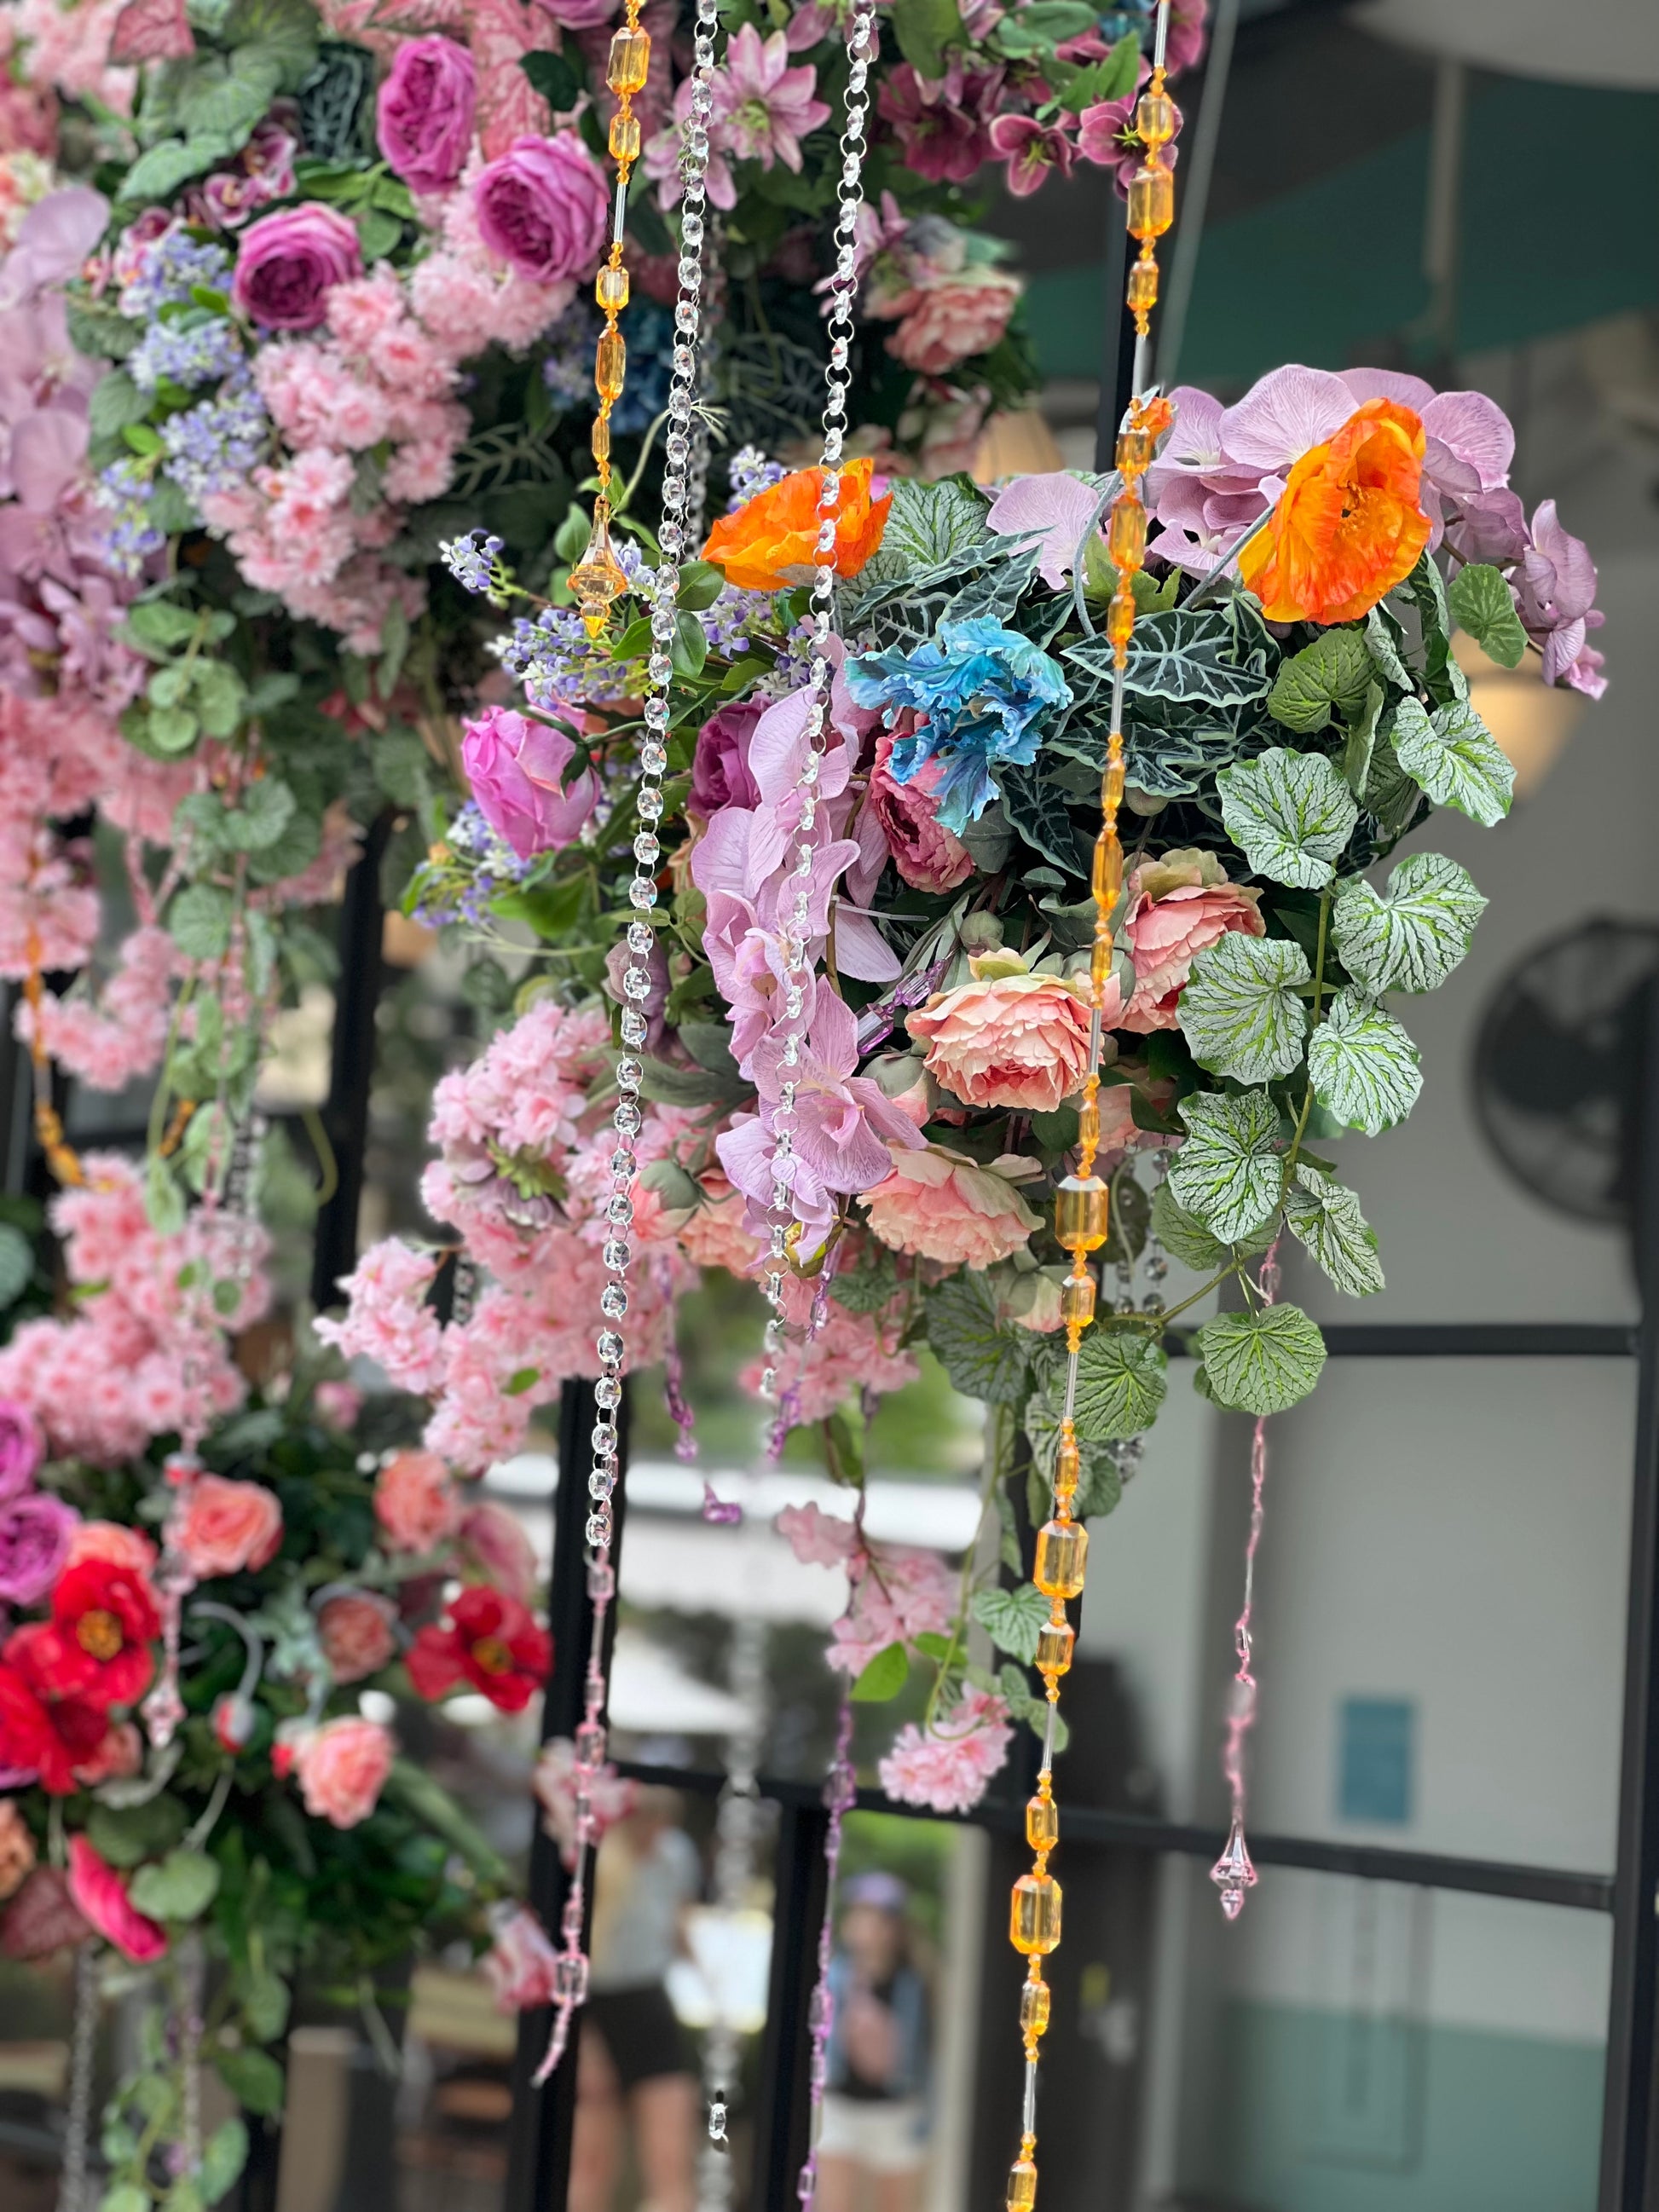 multiple types of flowers of different colors, hanging from above